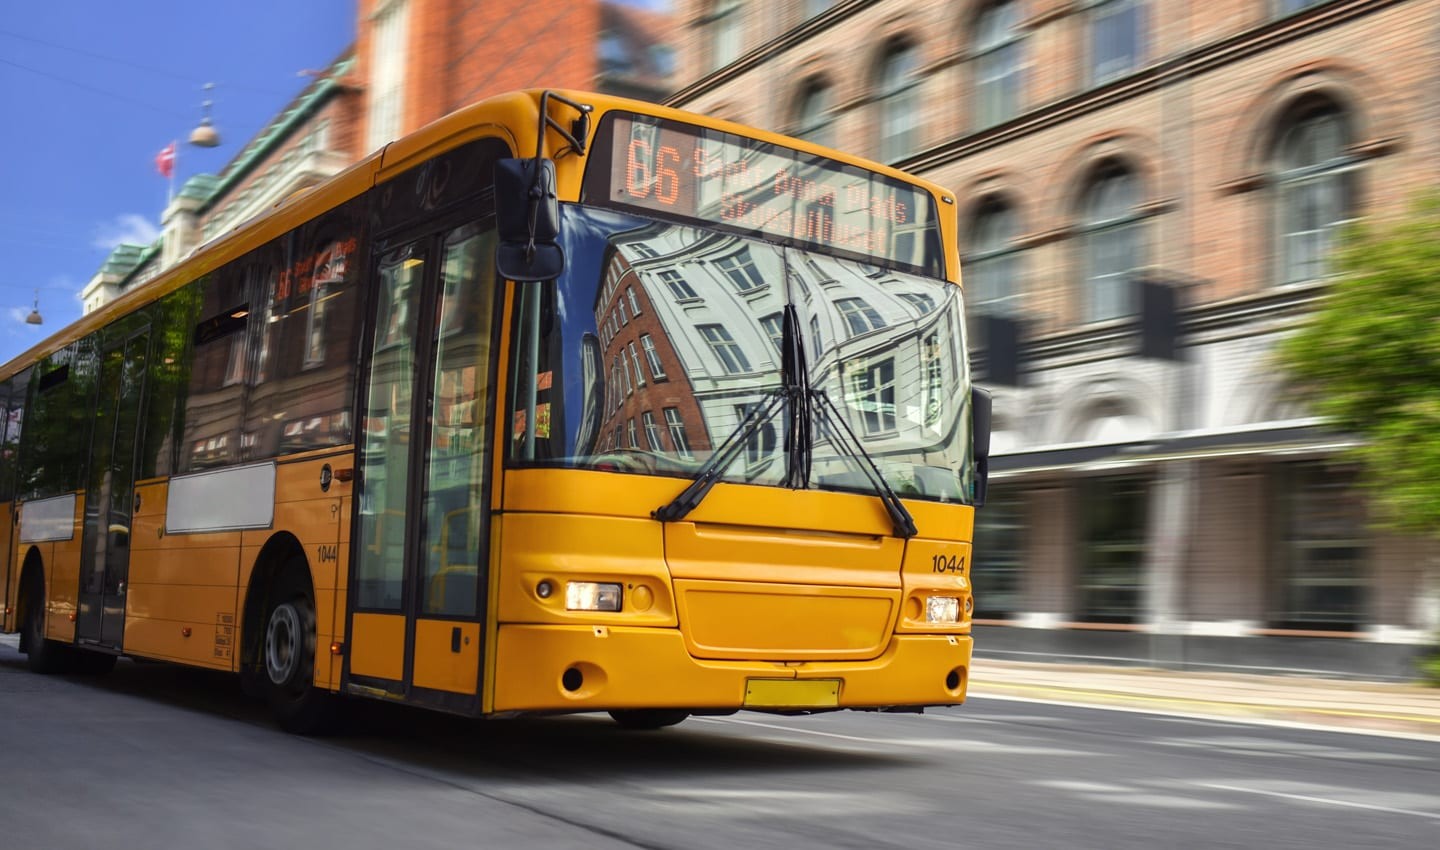 Diesel-powered school buses in the US will soon be converted to electric models.